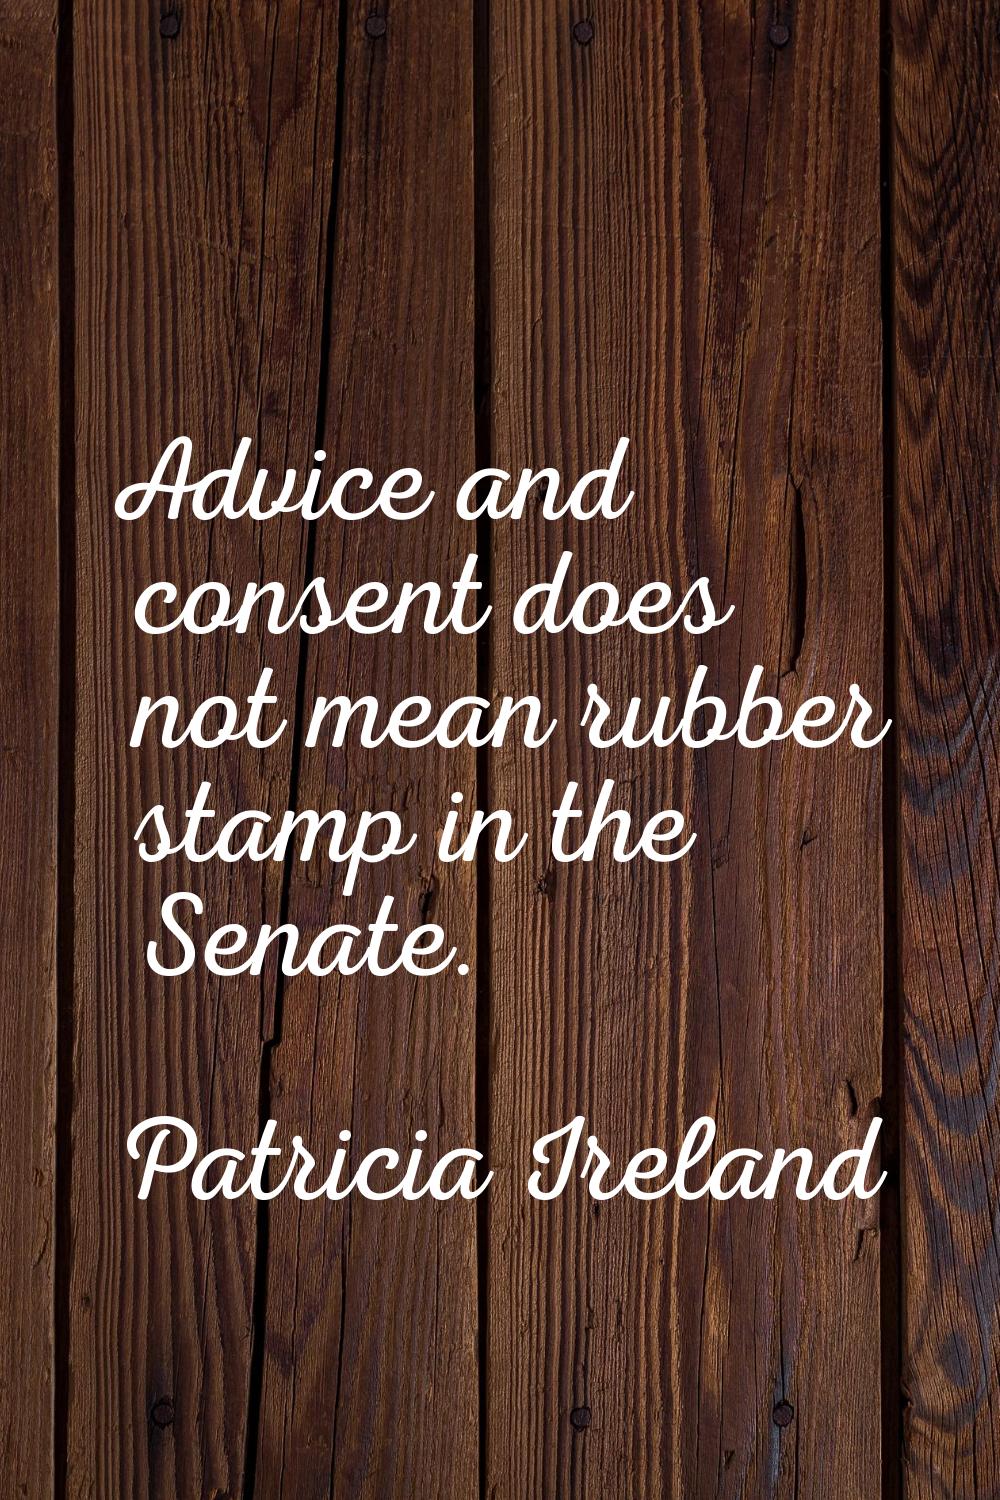 Advice and consent does not mean rubber stamp in the Senate.